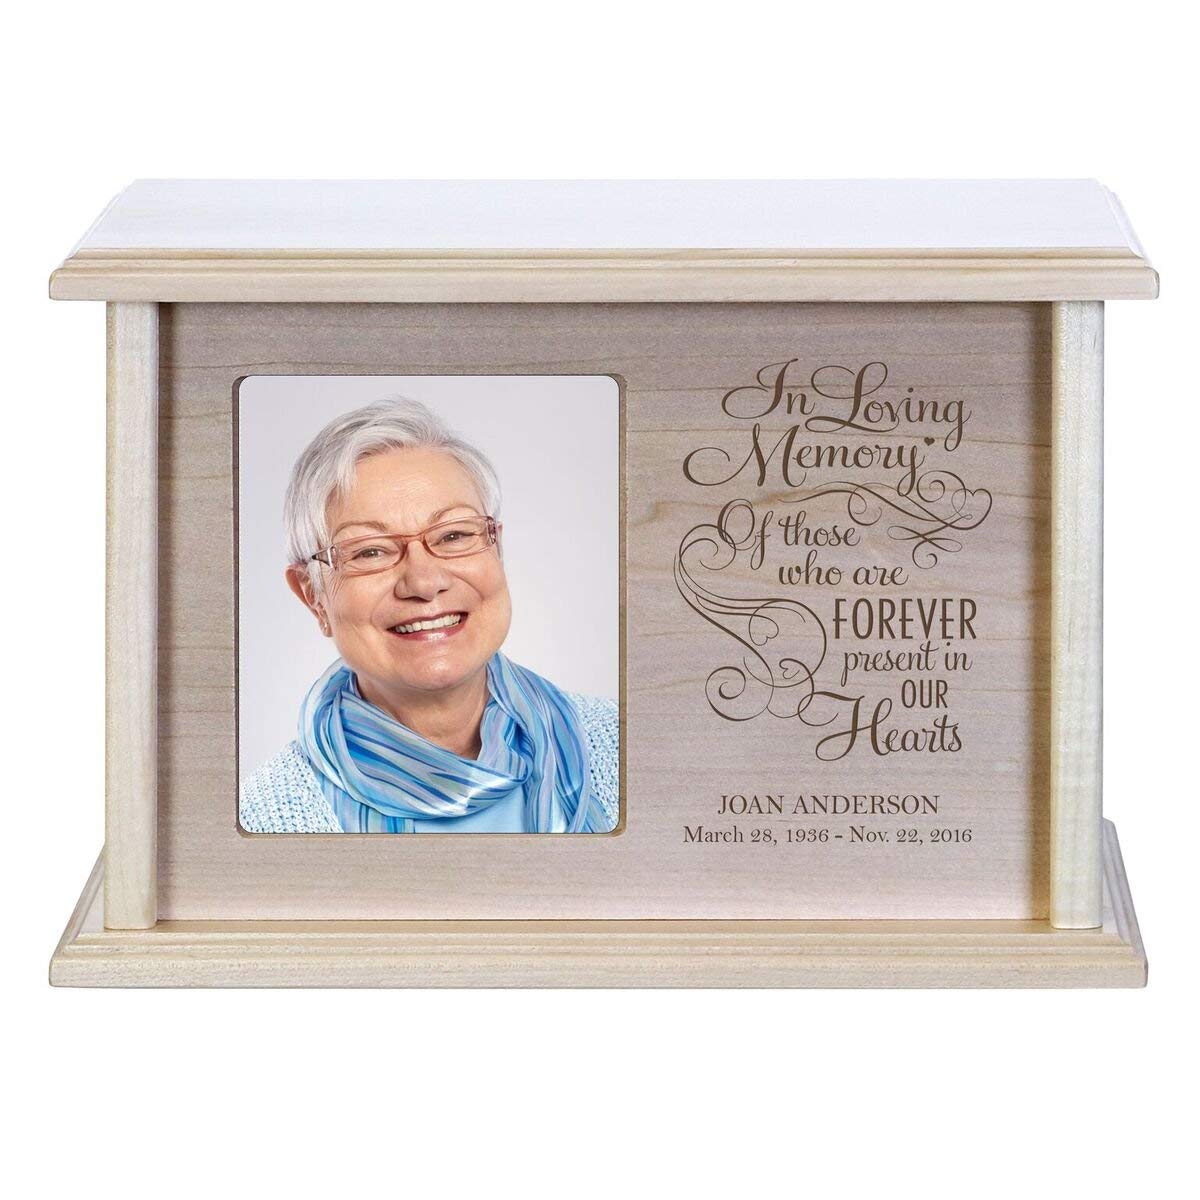 Custom Wooden Cremation Urn with Picture Frame holds 4x5 photo In Loving Memory Of Those Who Are Forever - LifeSong Milestones